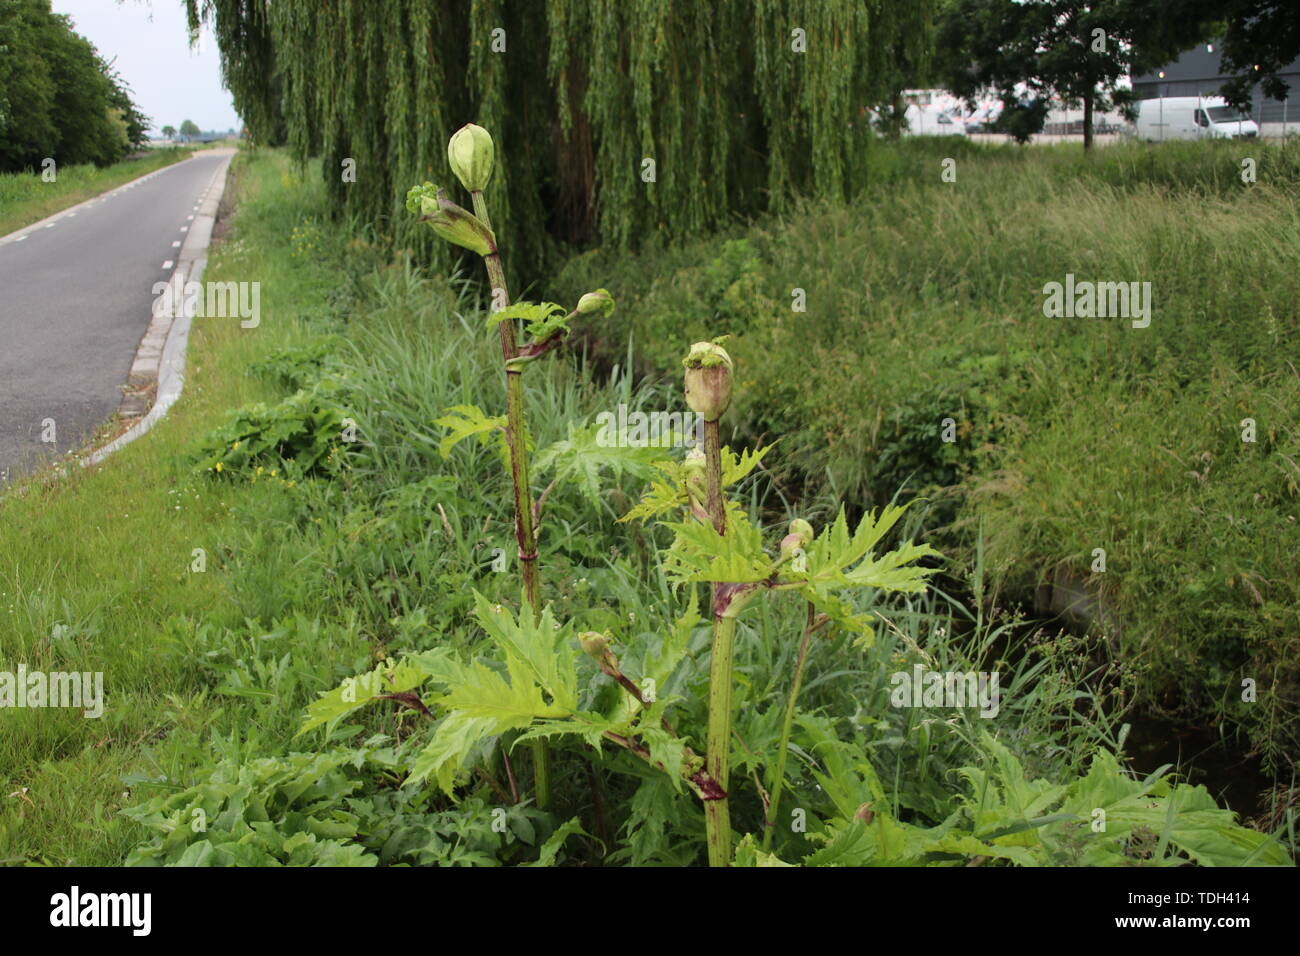 Hogweed plant along the side of the road in Moordrecht, the Netherlands Stock Photo